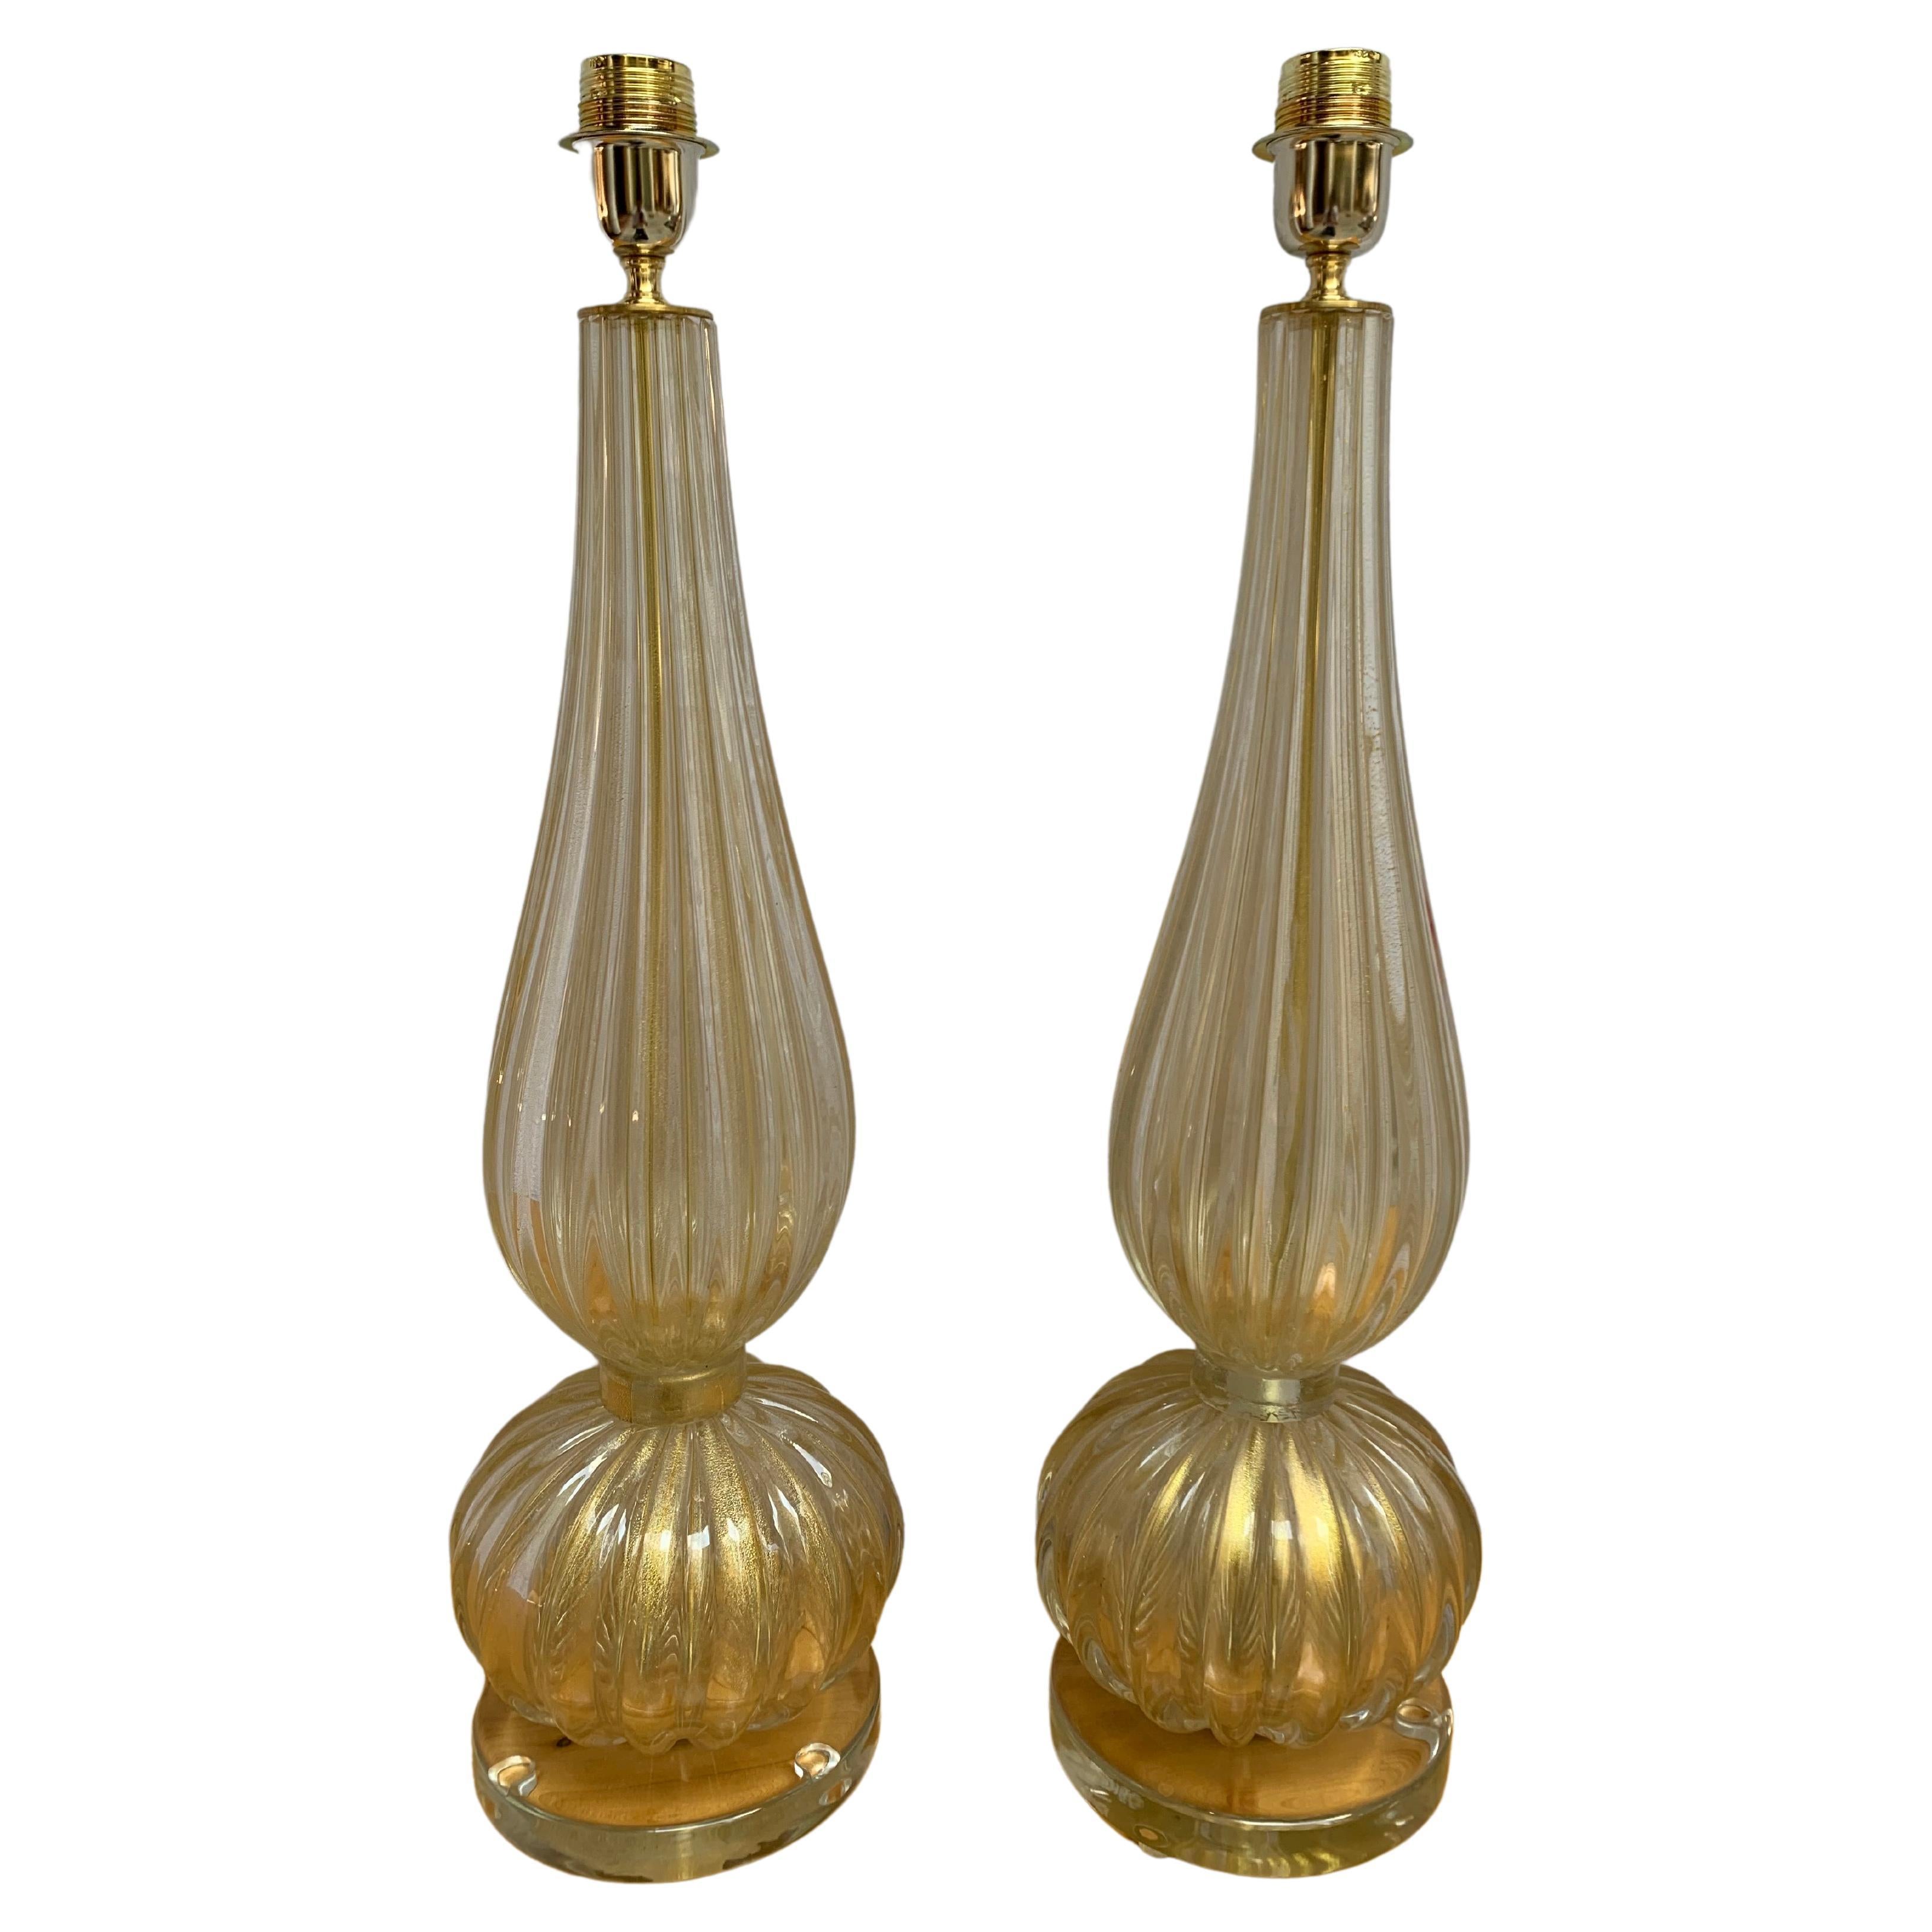 Stefano TOSO, Pair of Murano Table Lamps, 1990